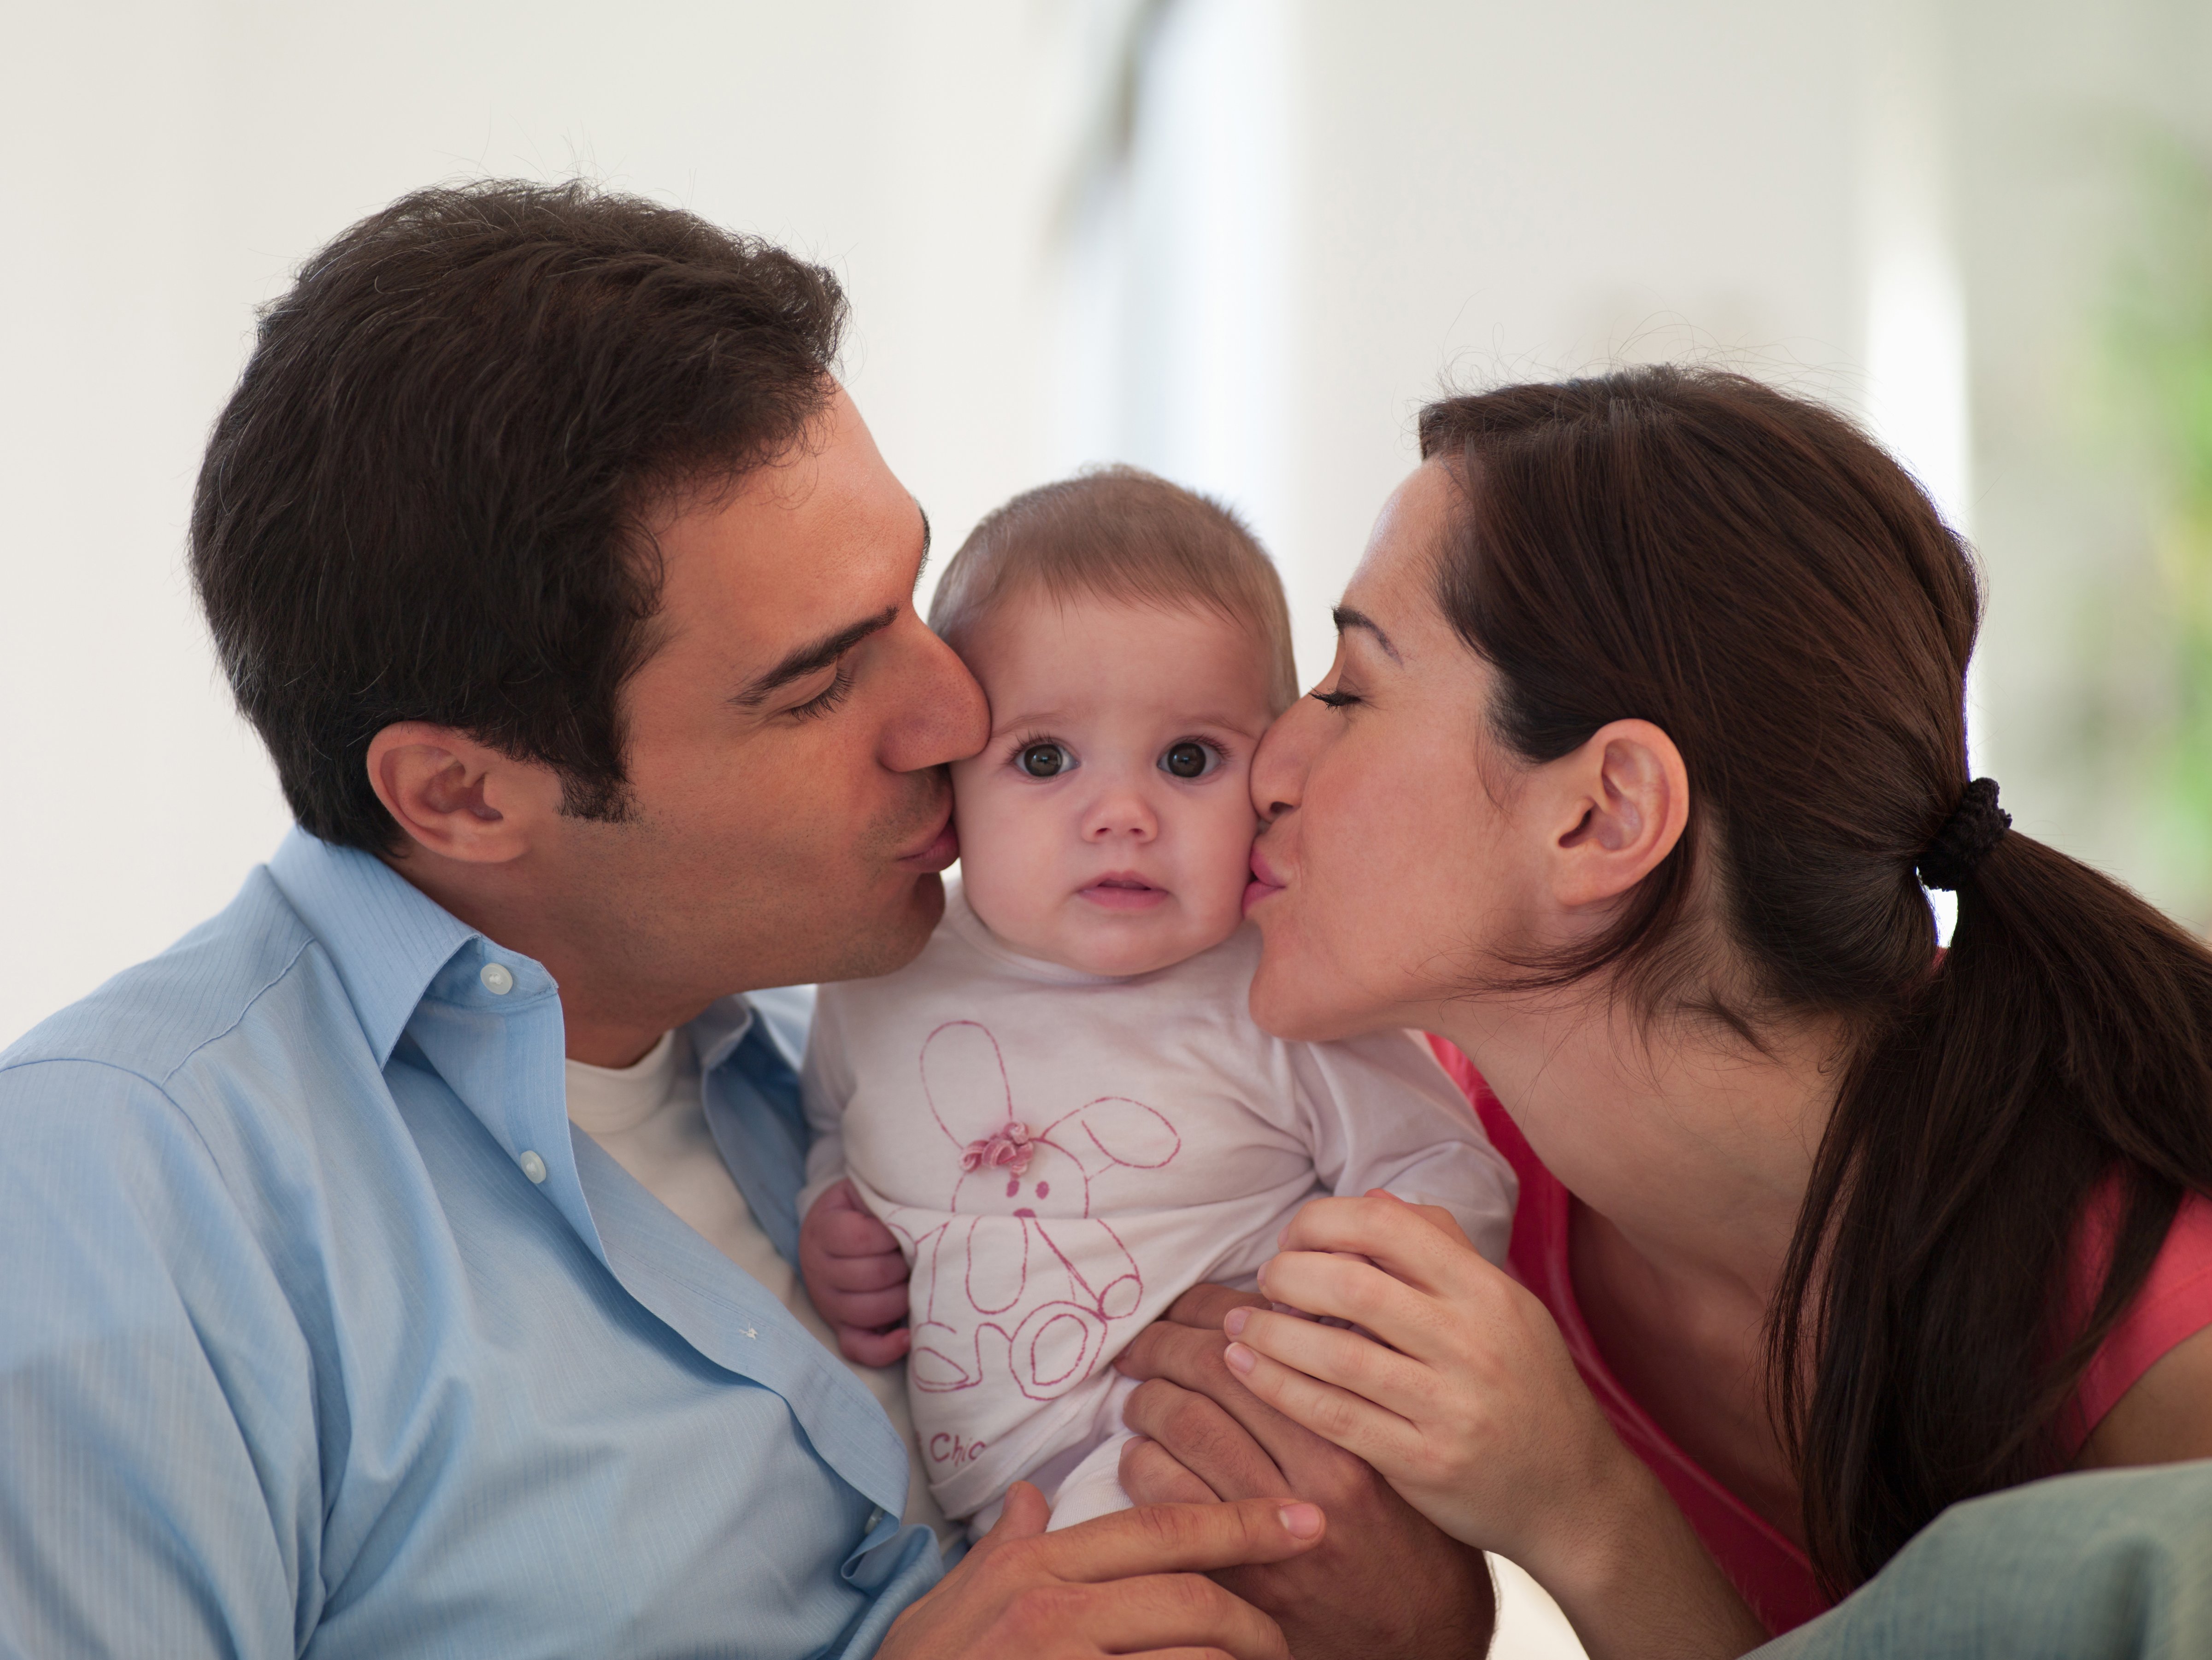 Mother and father are shown kissing their baby daughter. (Chris Ryan—OJO Images RF/Getty Images)